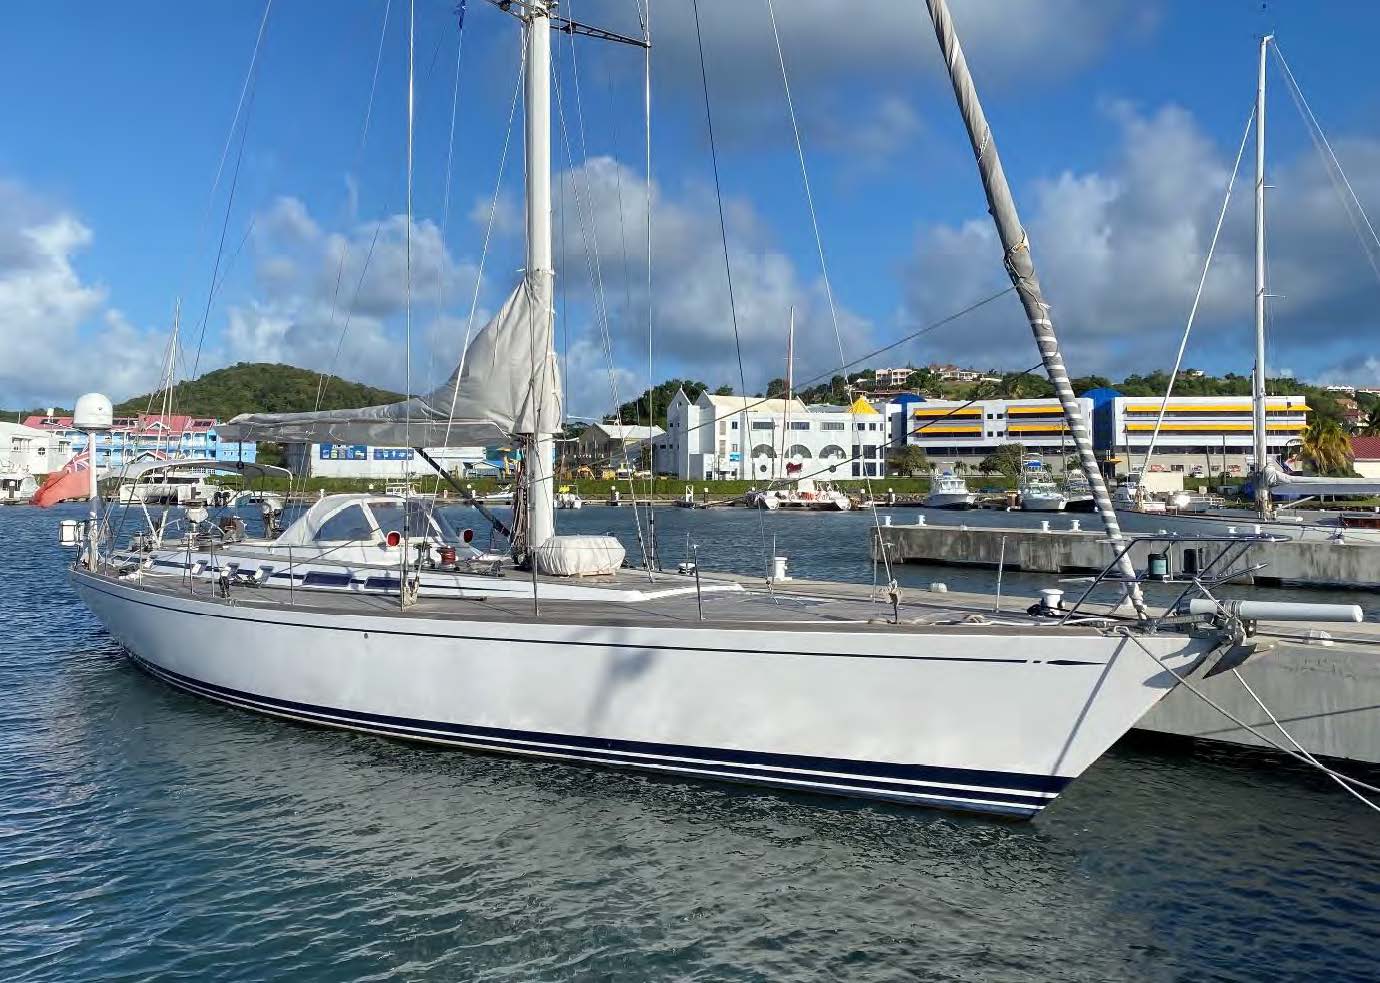 Sailing Yacht EXPLOTADOT Now Listed for Sale at 605,000 EUR with Yachtzoo